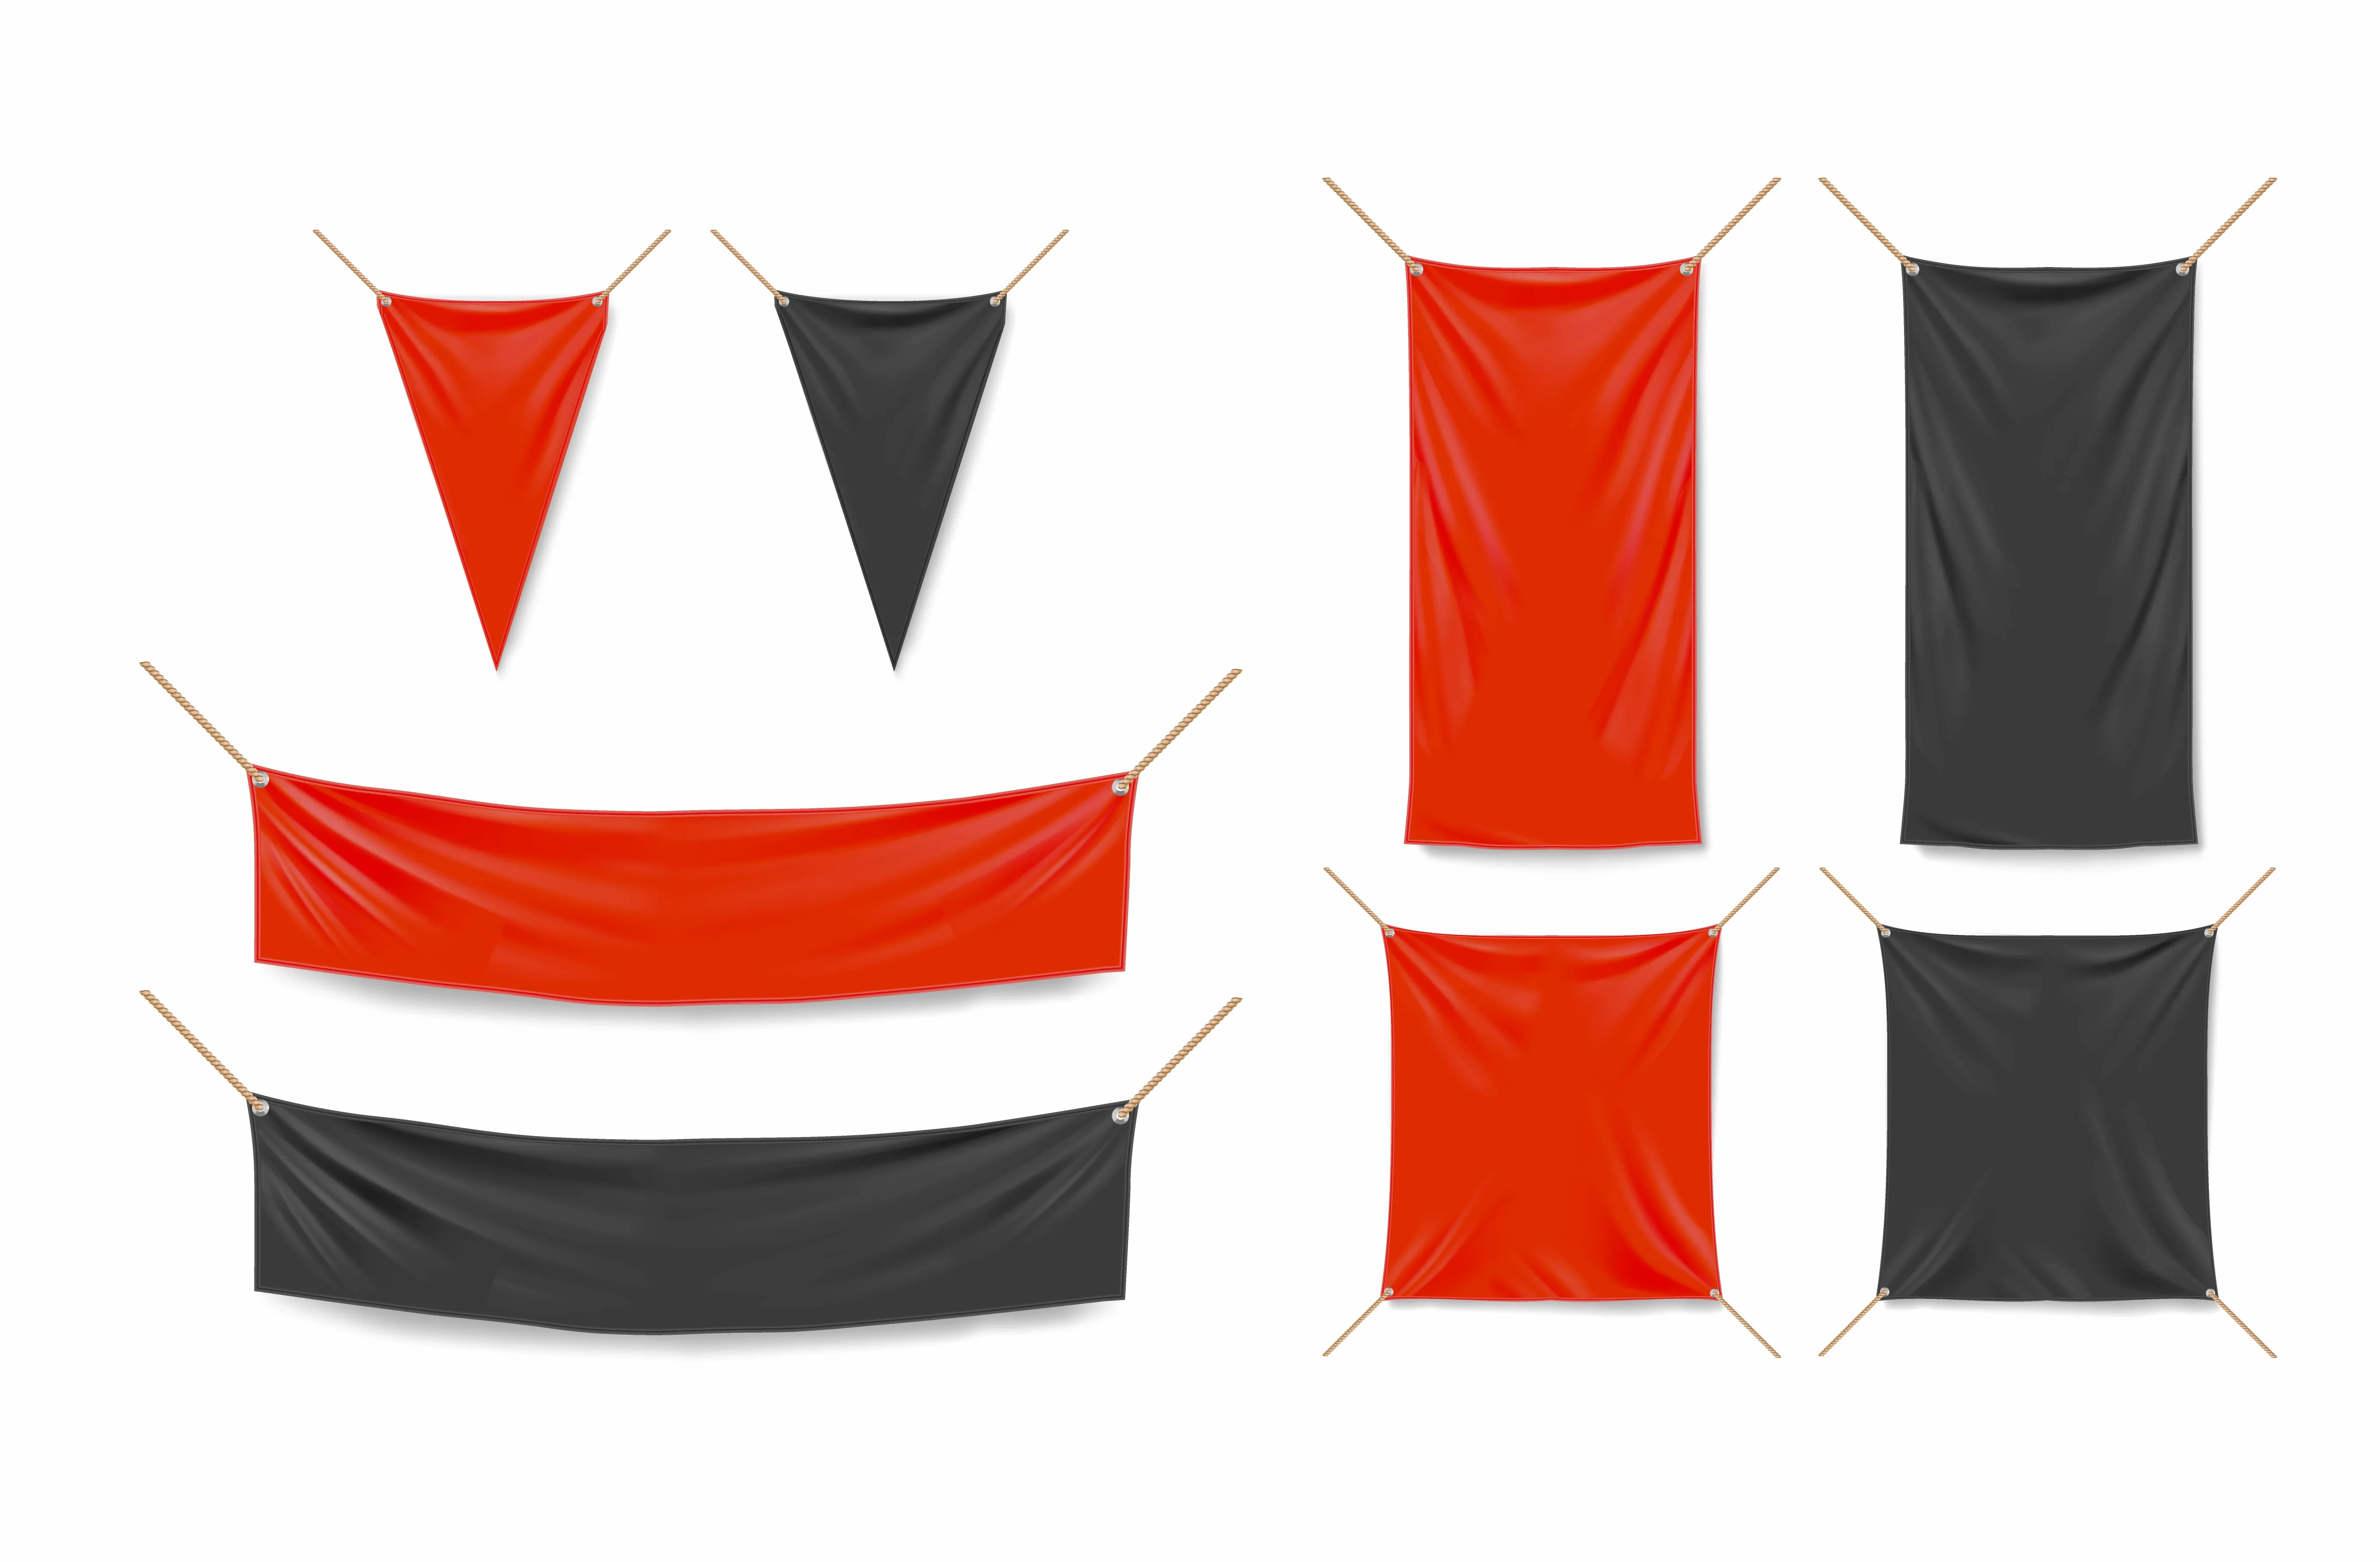 Red and black banners and triangle pennants